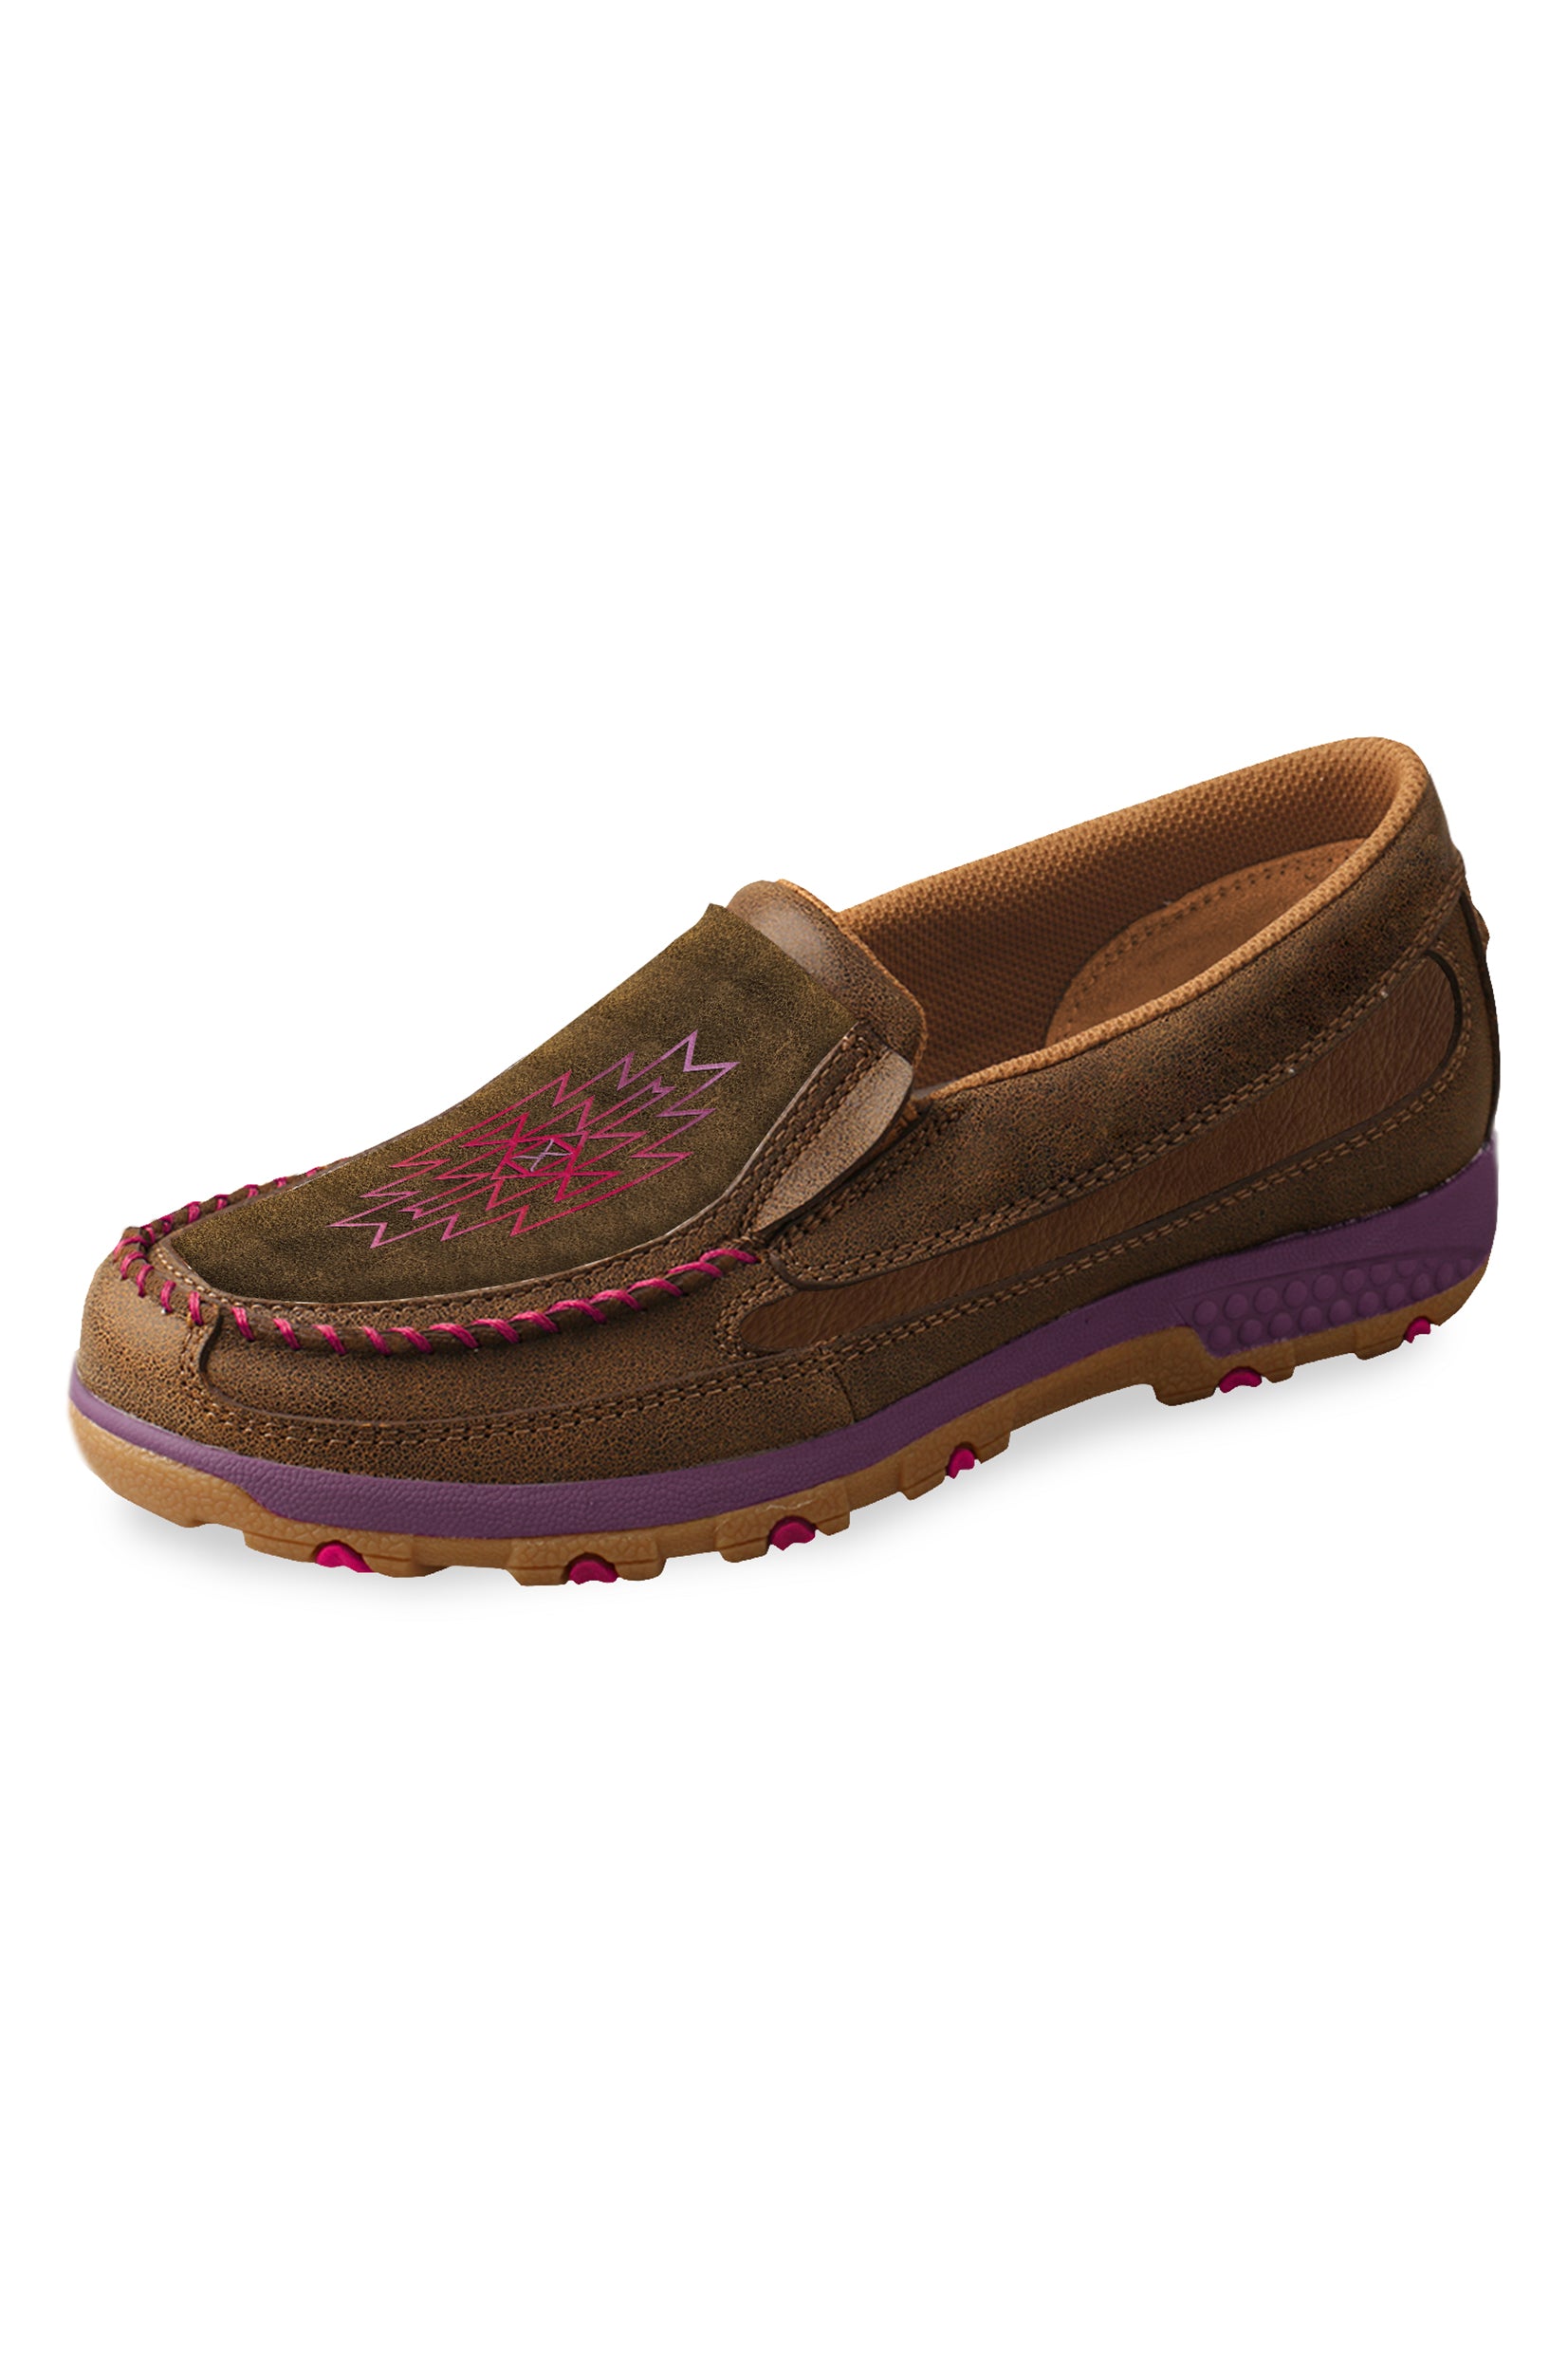 Twisted X Ladies Stitch Cellstretch Mocs Slip On - New Year Clearance